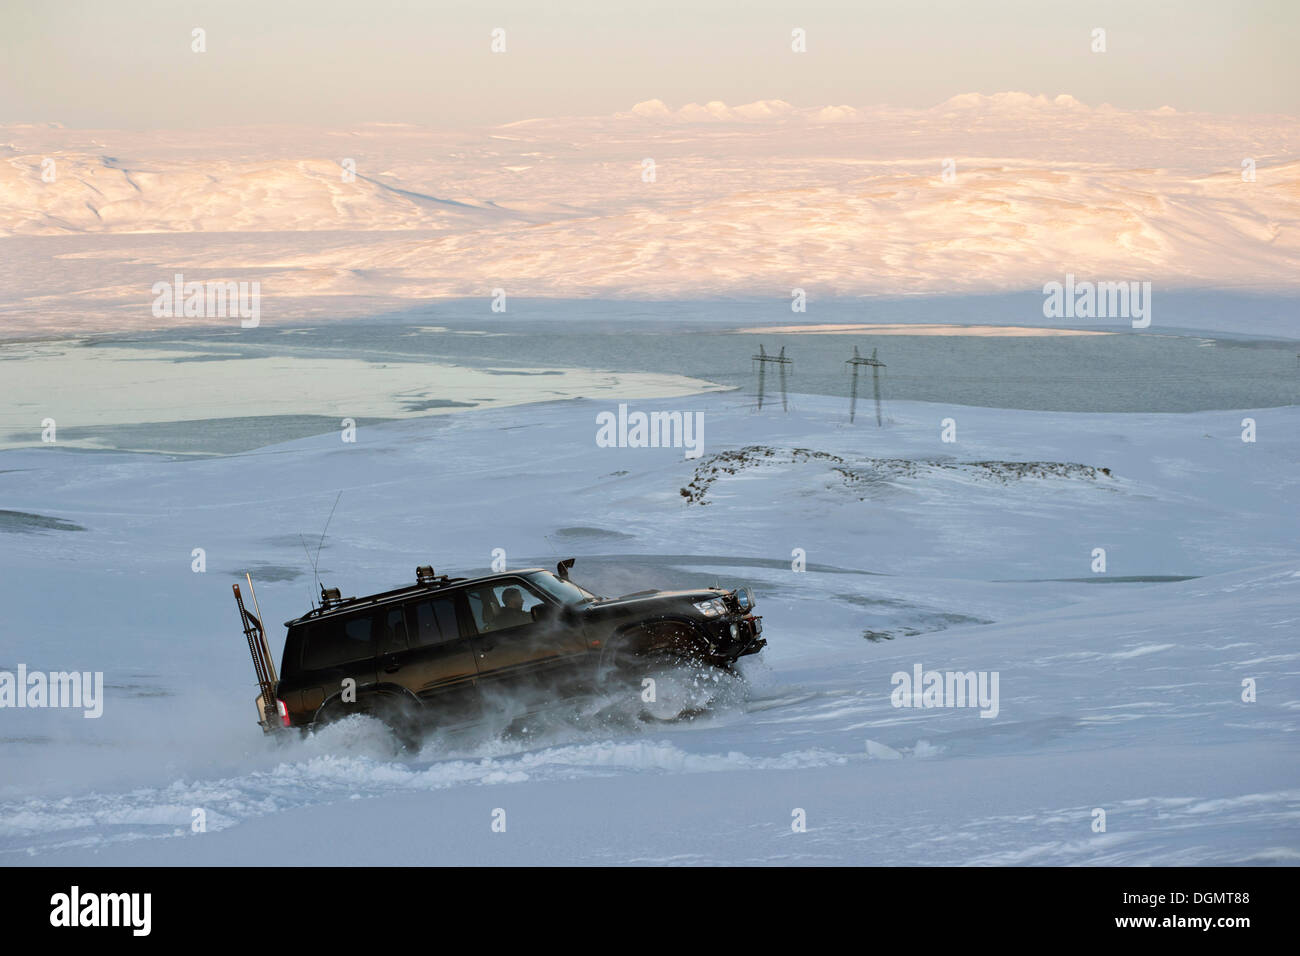 Super Jeep driving at full throttle up a steep snowy slope, Hrauneyjar, Iceland, Europe Stock Photo